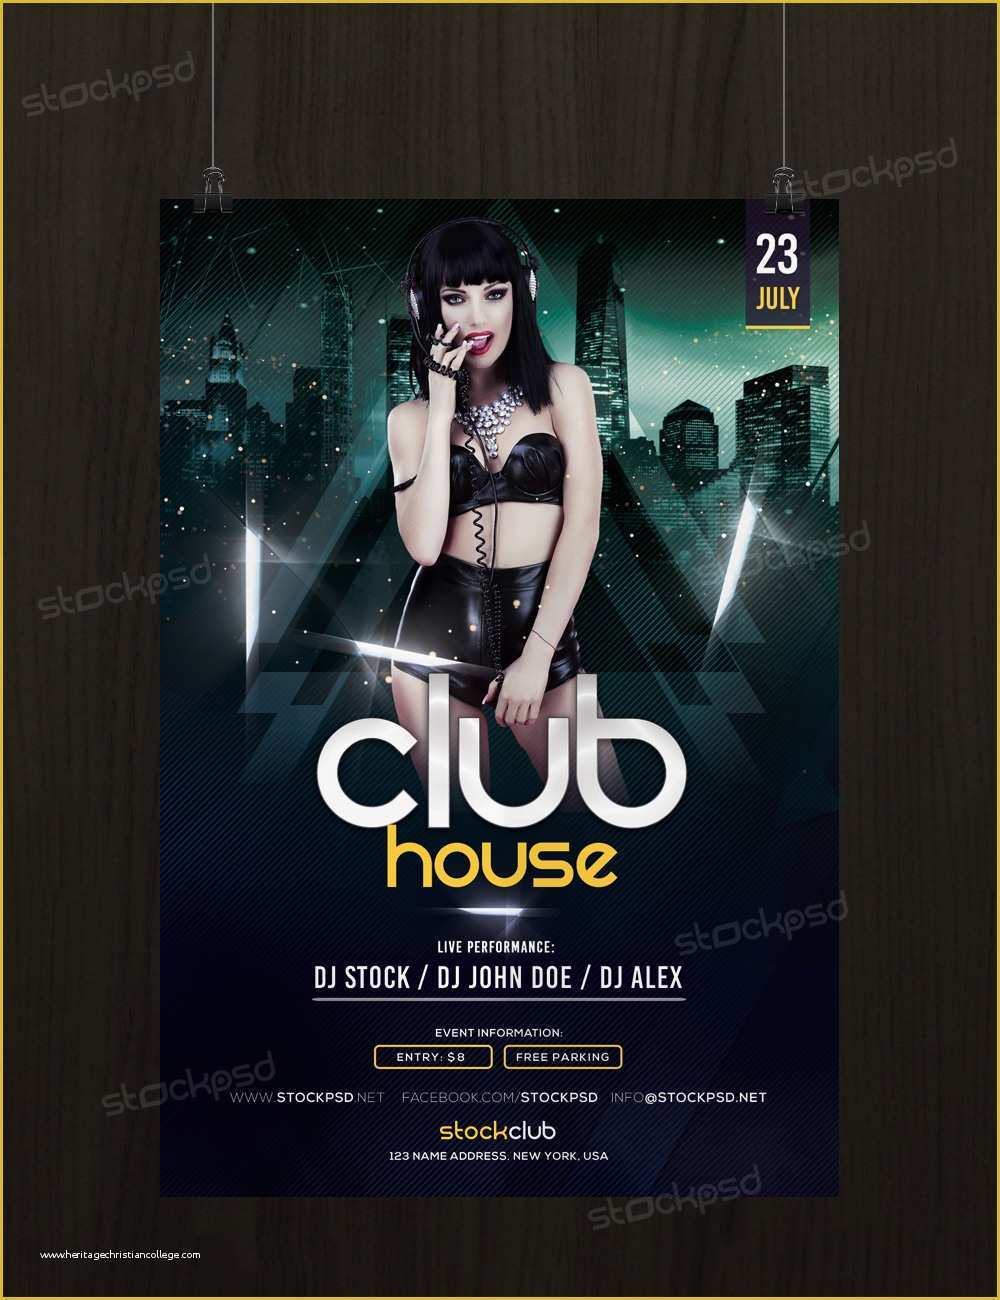 Free Photoshop Templates Of Get Free Club House Flyer Template Shop